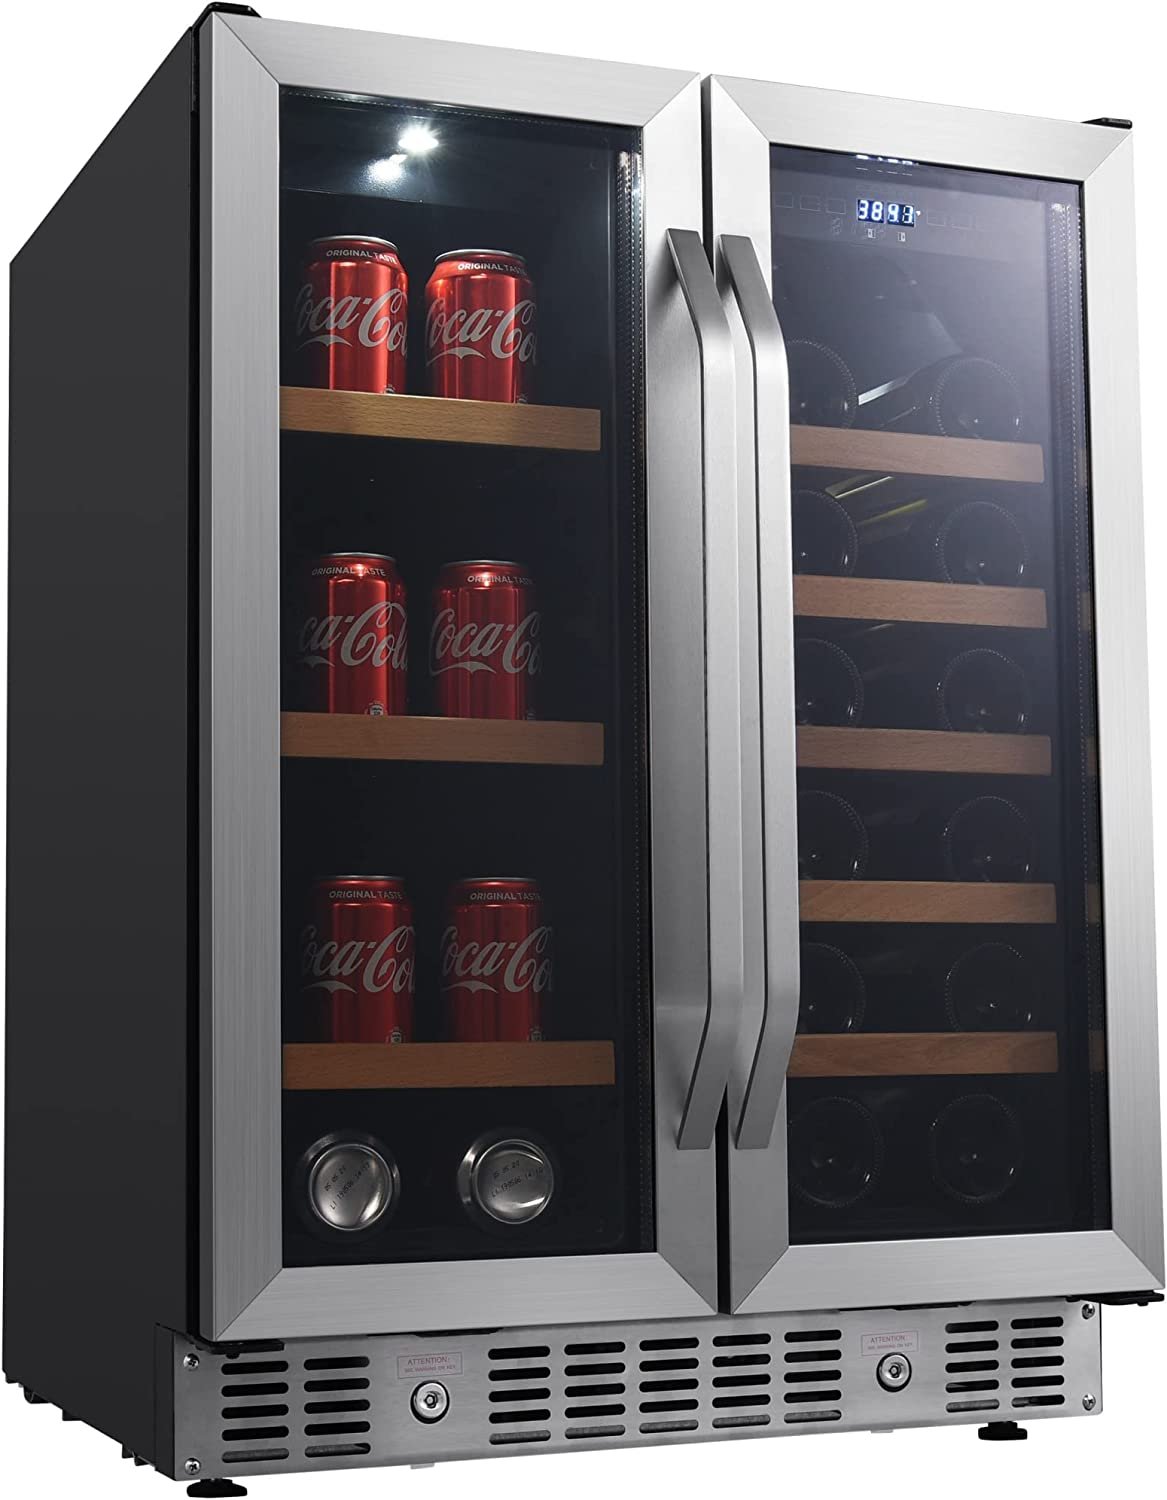 EdgeStar 24 Inch Built-In Wine and Beverage Cooler with French Doors